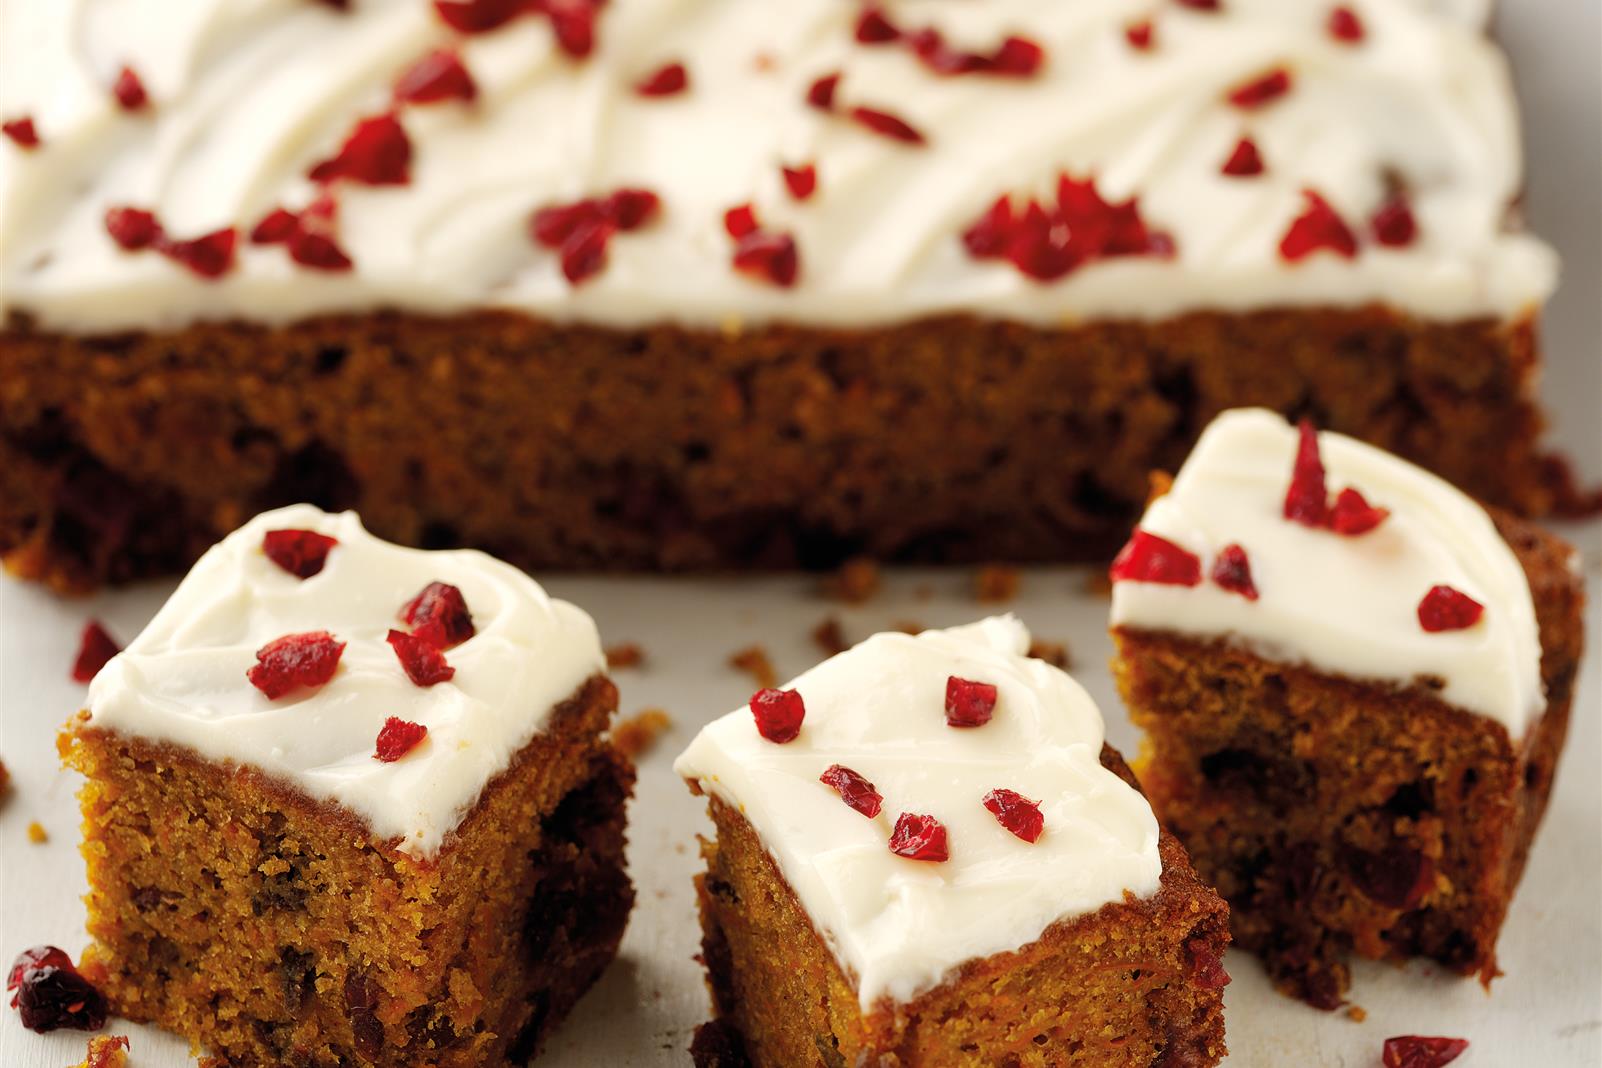 Cranberry and Butternut Squash Cake